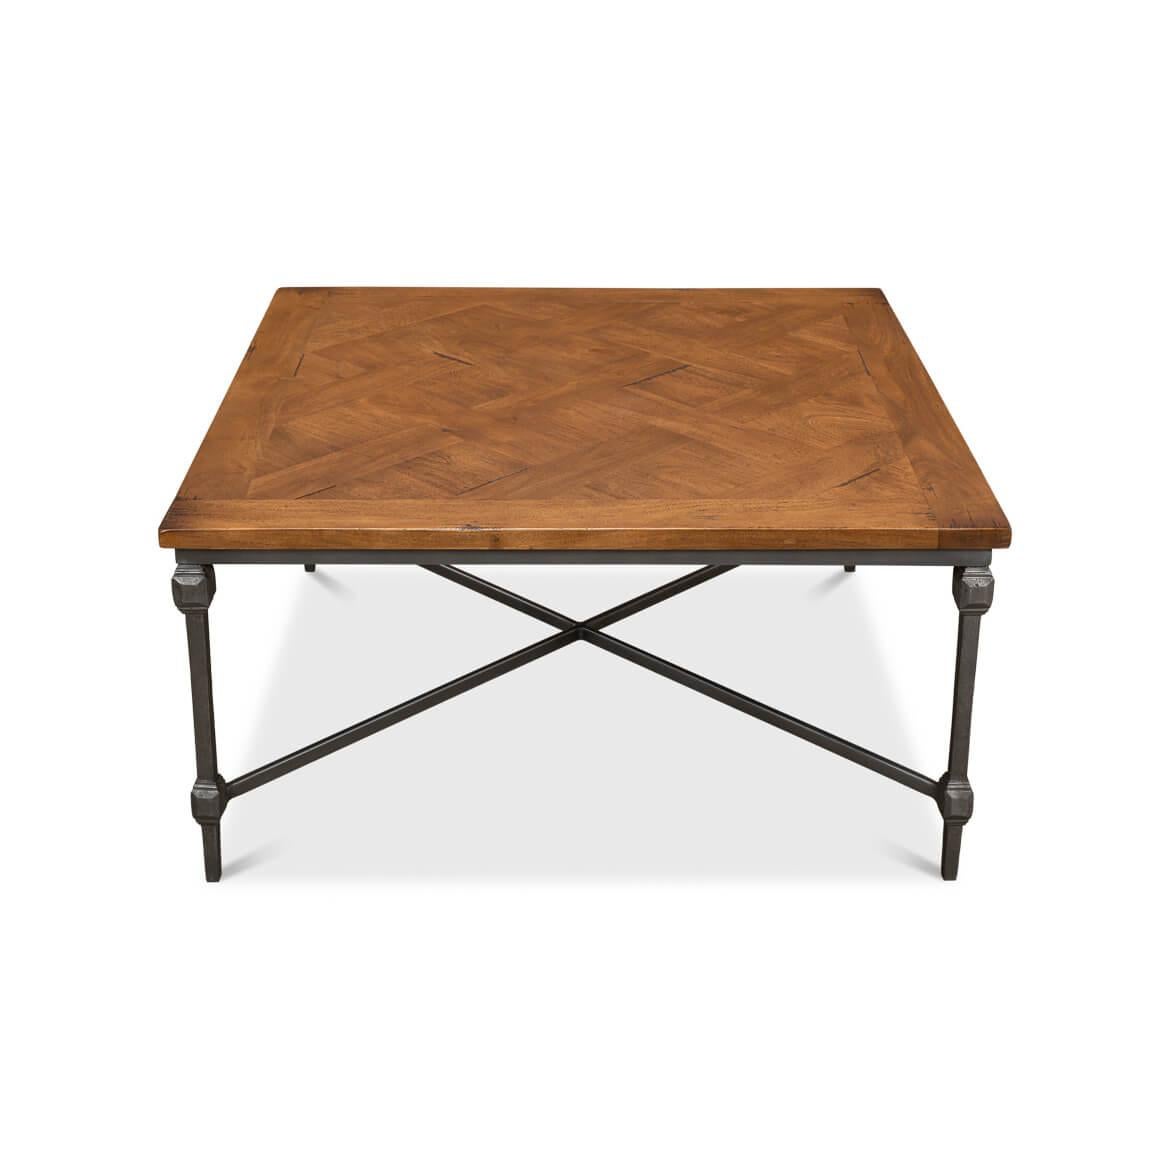 Asian Heritage Parquet Square Coffee Table For Sale